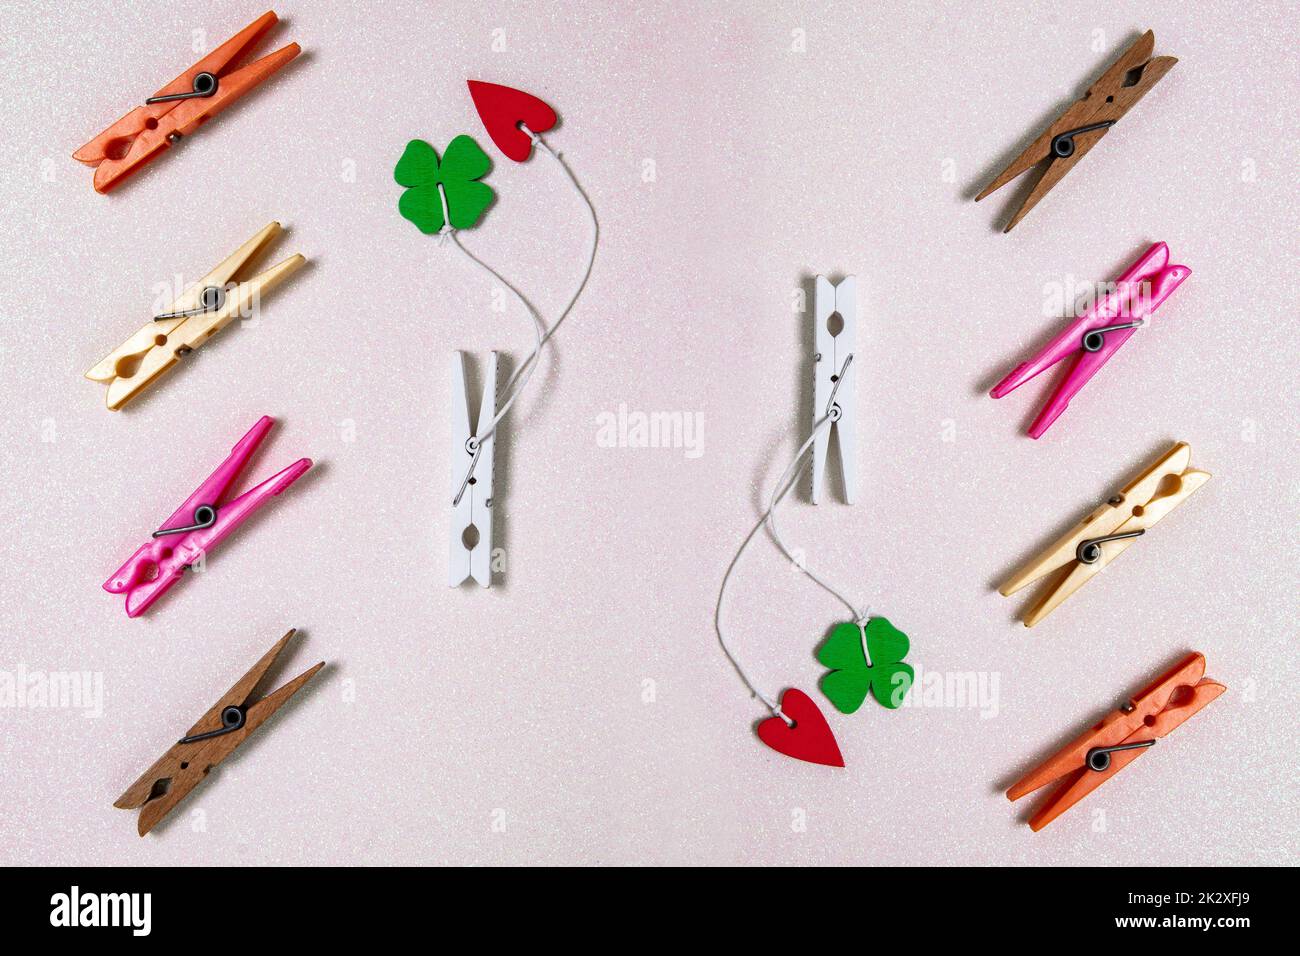 Colorful set of different wooden and plastic clothes pegs on a light pink glitter background. A red and a green lucky clover leaf are attached to each of the white wooden clothes pegs. Top view. Stock Photo